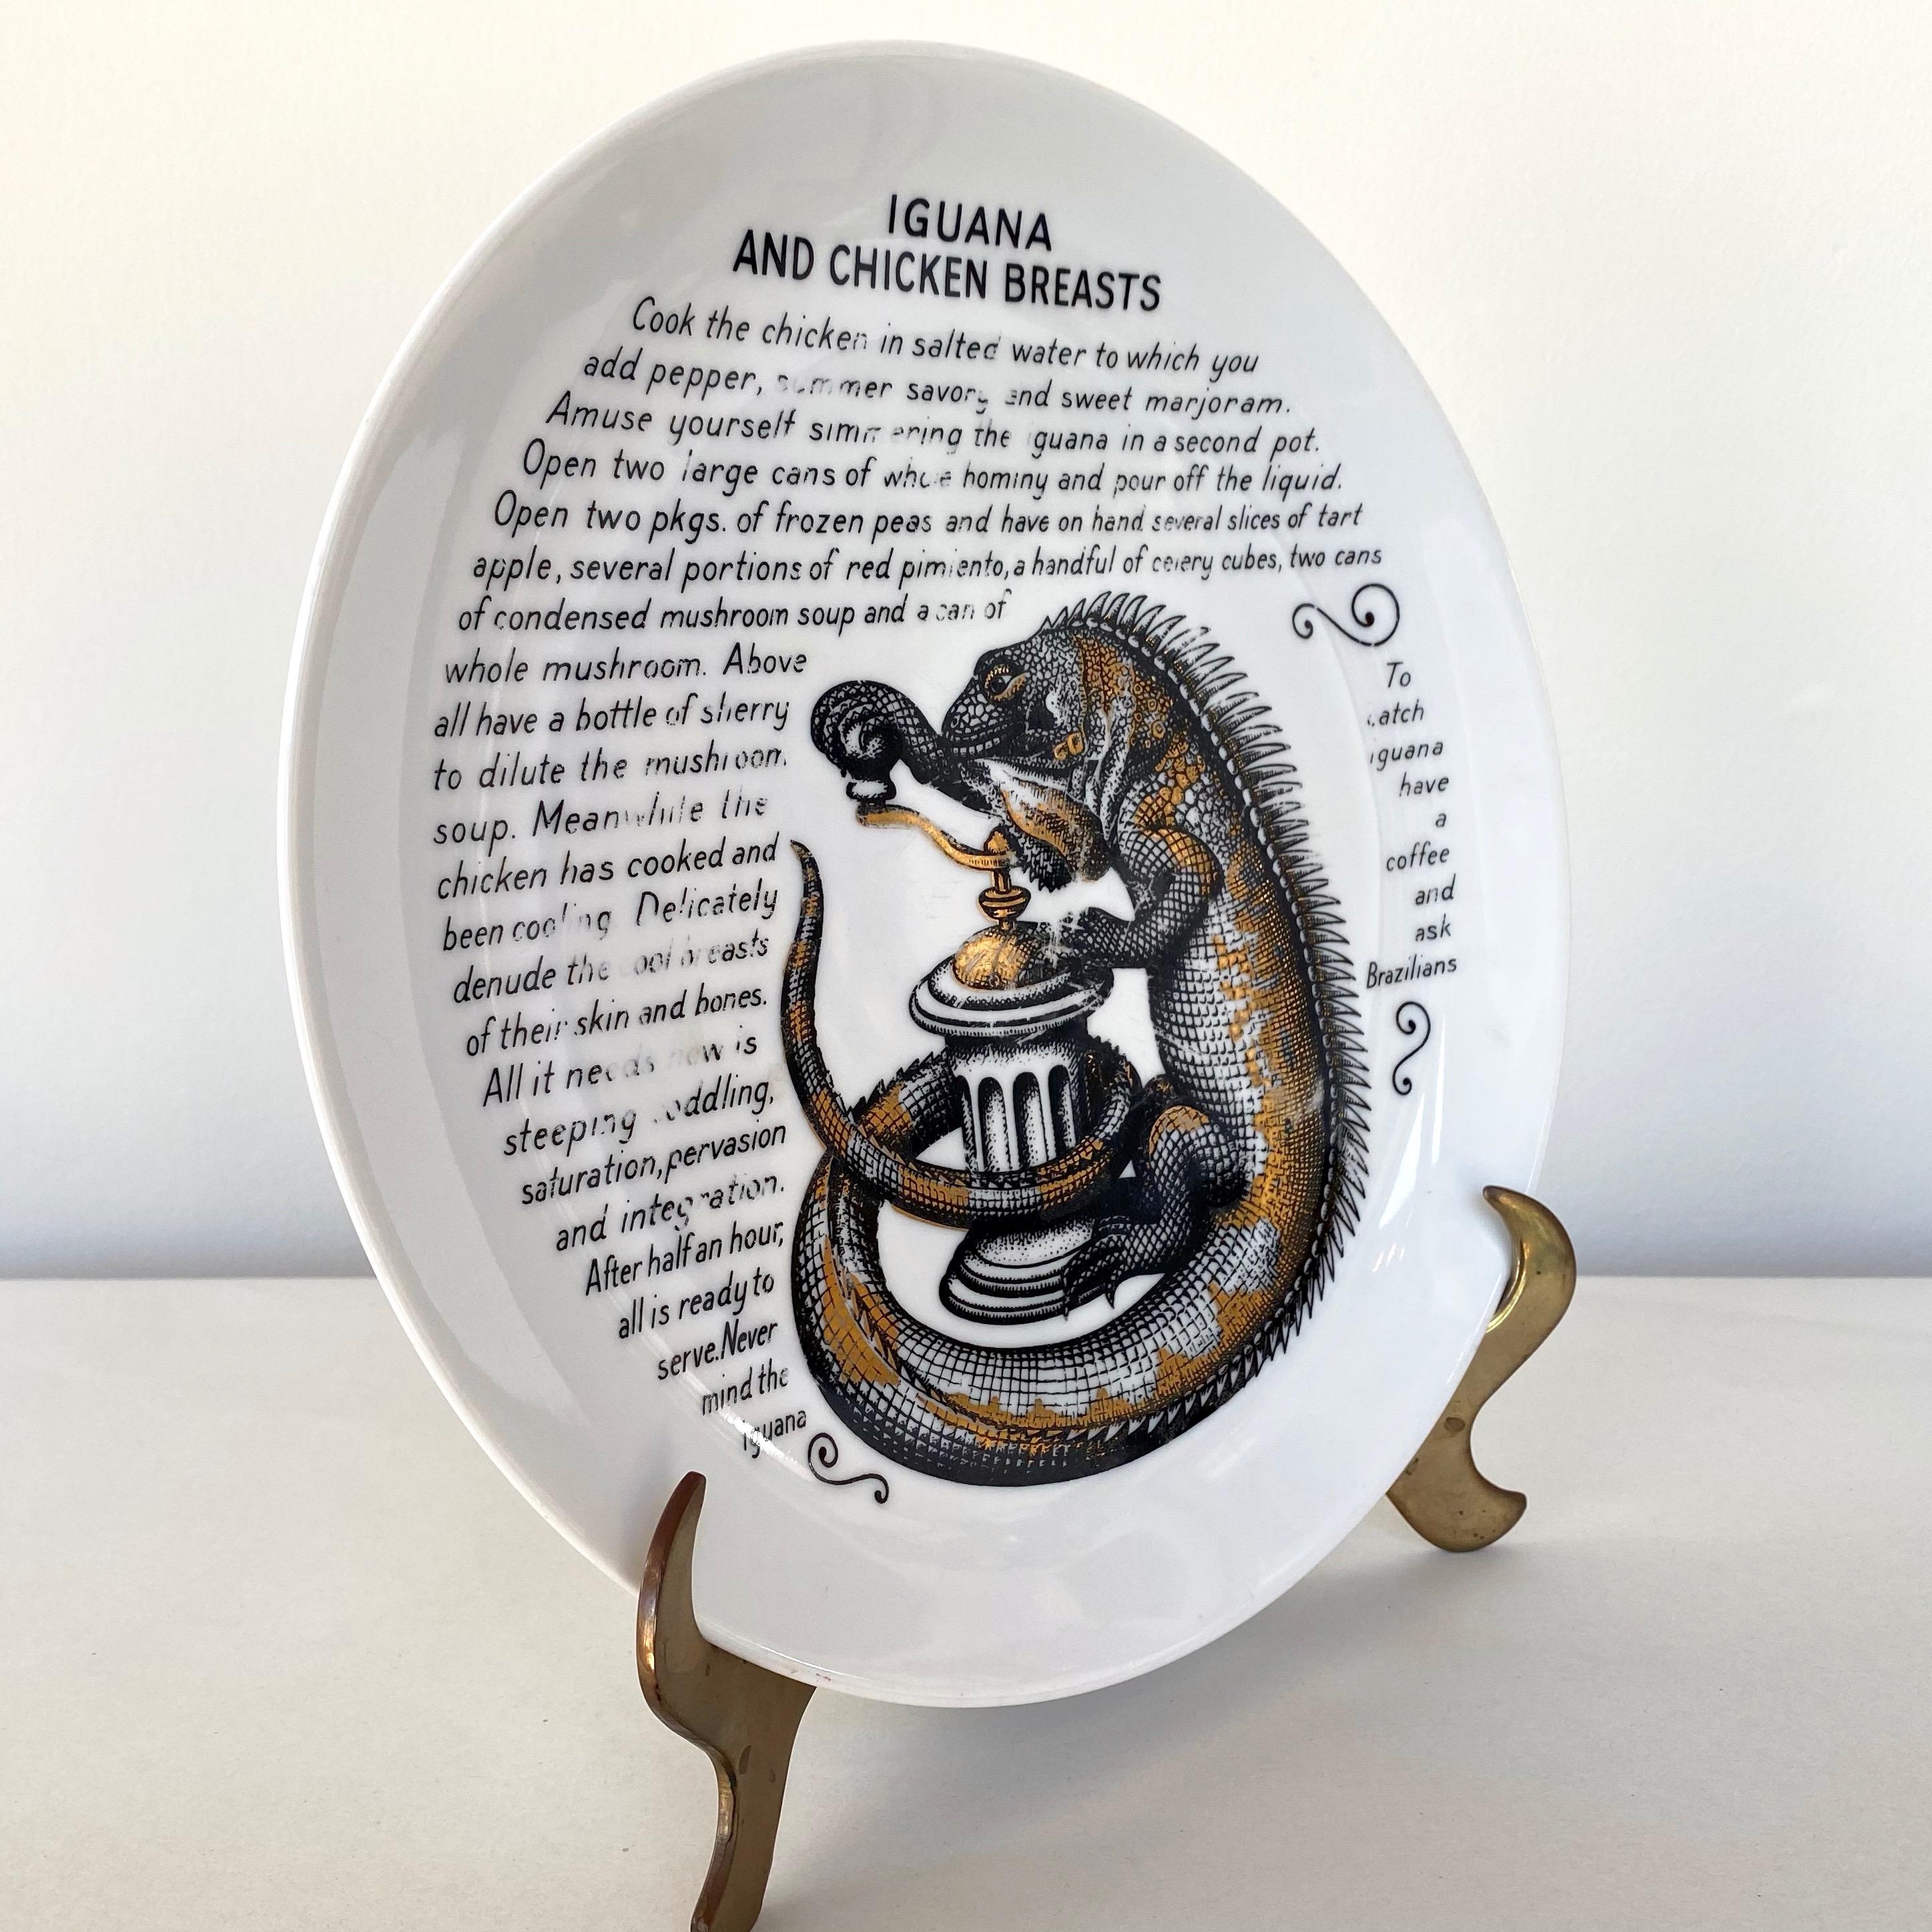 Italian Fornasetti for Fleming Joffe “Iguana and Chicken Breasts” Recipe Plate, 1960s For Sale